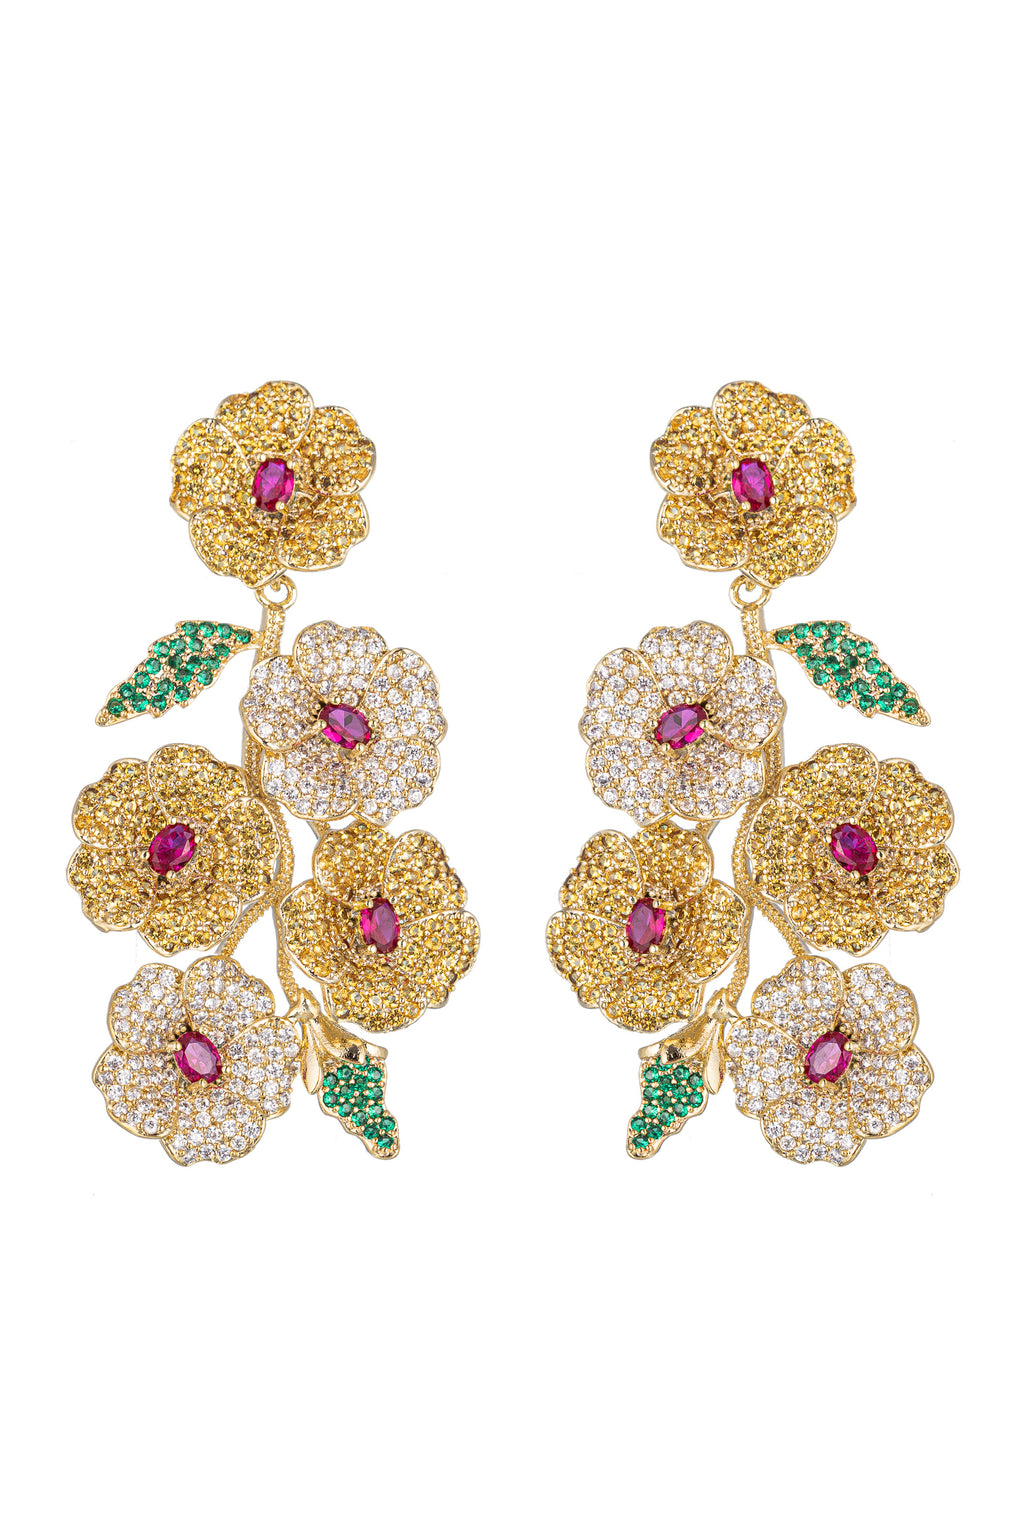 Gold brass flower drop earrings studded with multicolored CZ crystals.